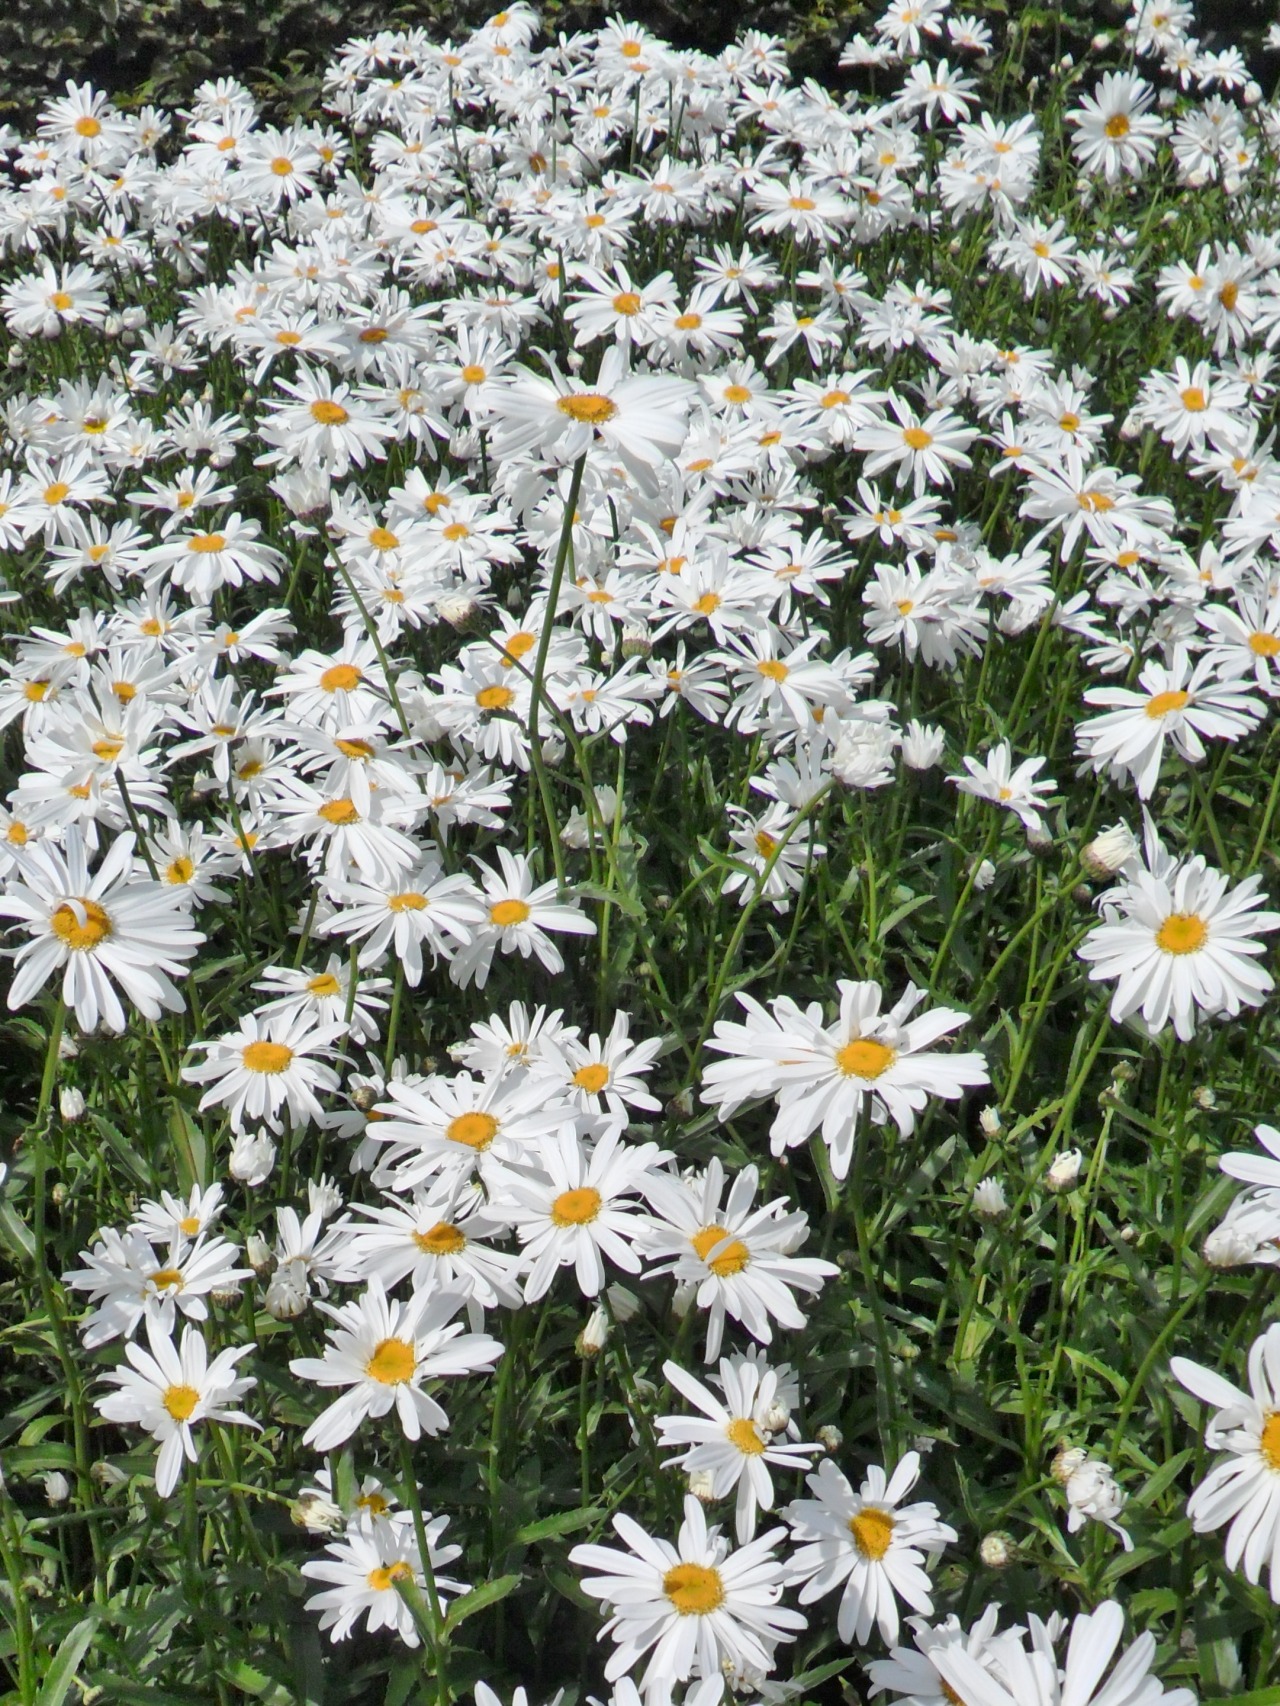 Lost in a field of daisies.
Falling between the stalks.
Covered by their leaves.
Pulled down by their roots.
Darkness buries me.
Dirt envelopes me.
Illusion becomes reality.
A nightmare becomes hell.
No way out for me.
Only the faces of daisies.
THE...